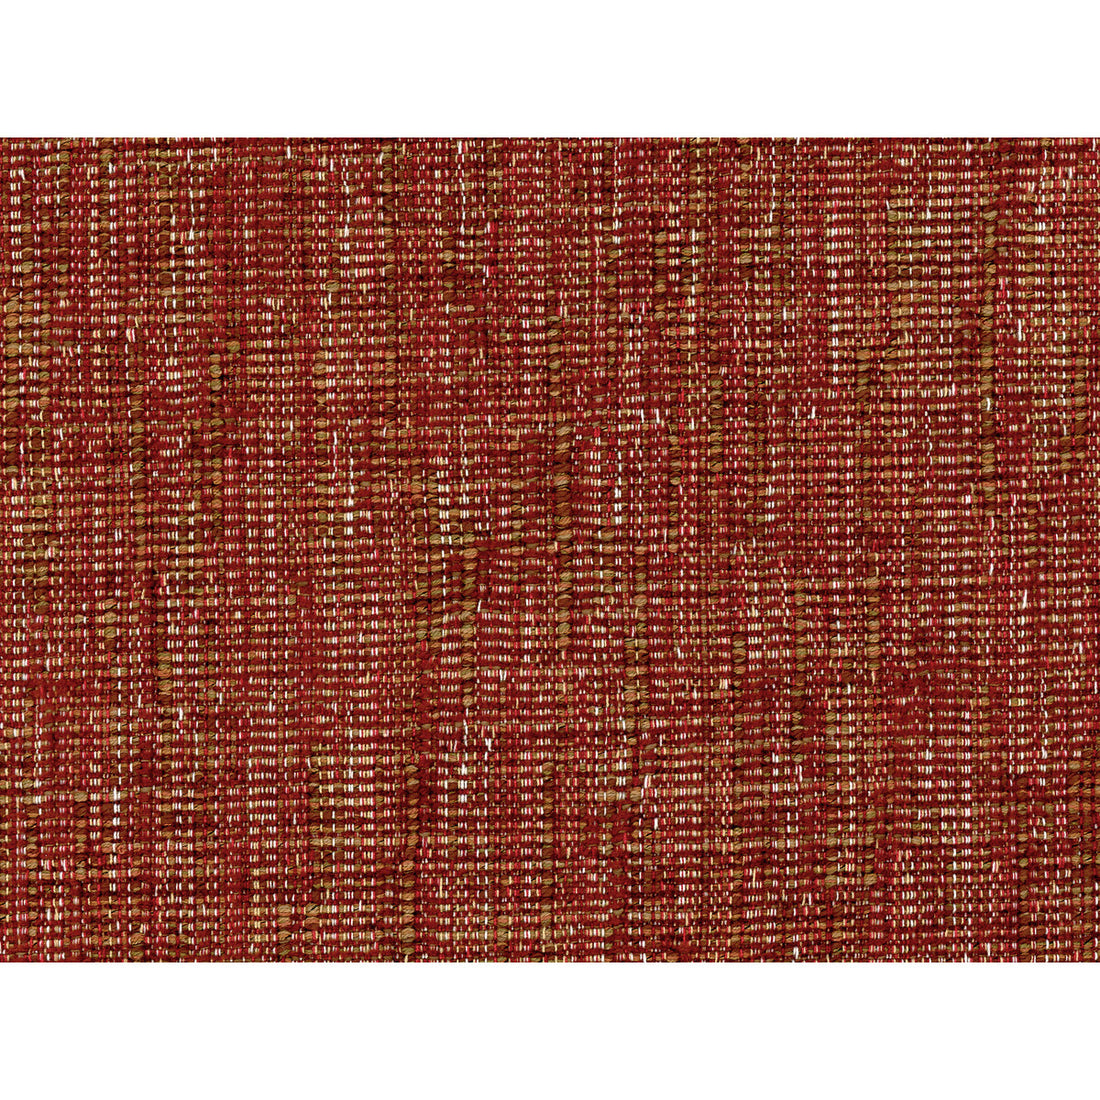 Morecambe Bay fabric in cinnabar color - pattern 2016124.196.0 - by Lee Jofa in the Furness Weaves collection